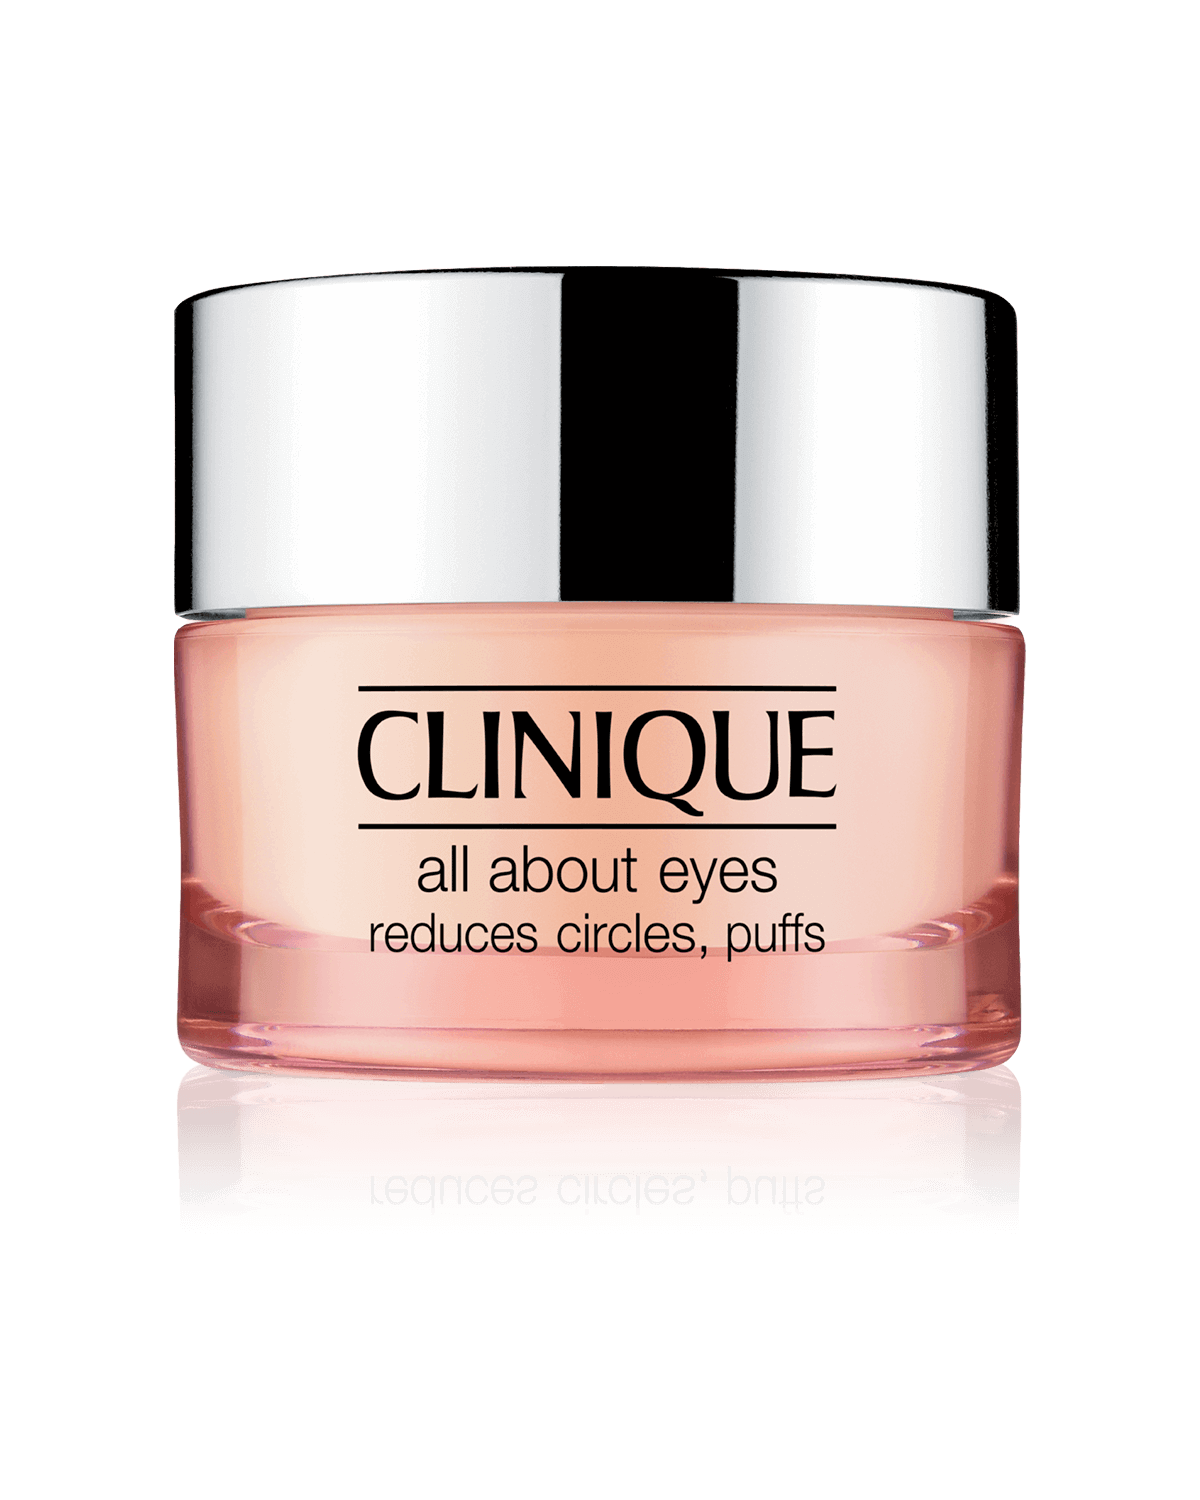 Clinique all about eye full sized without box